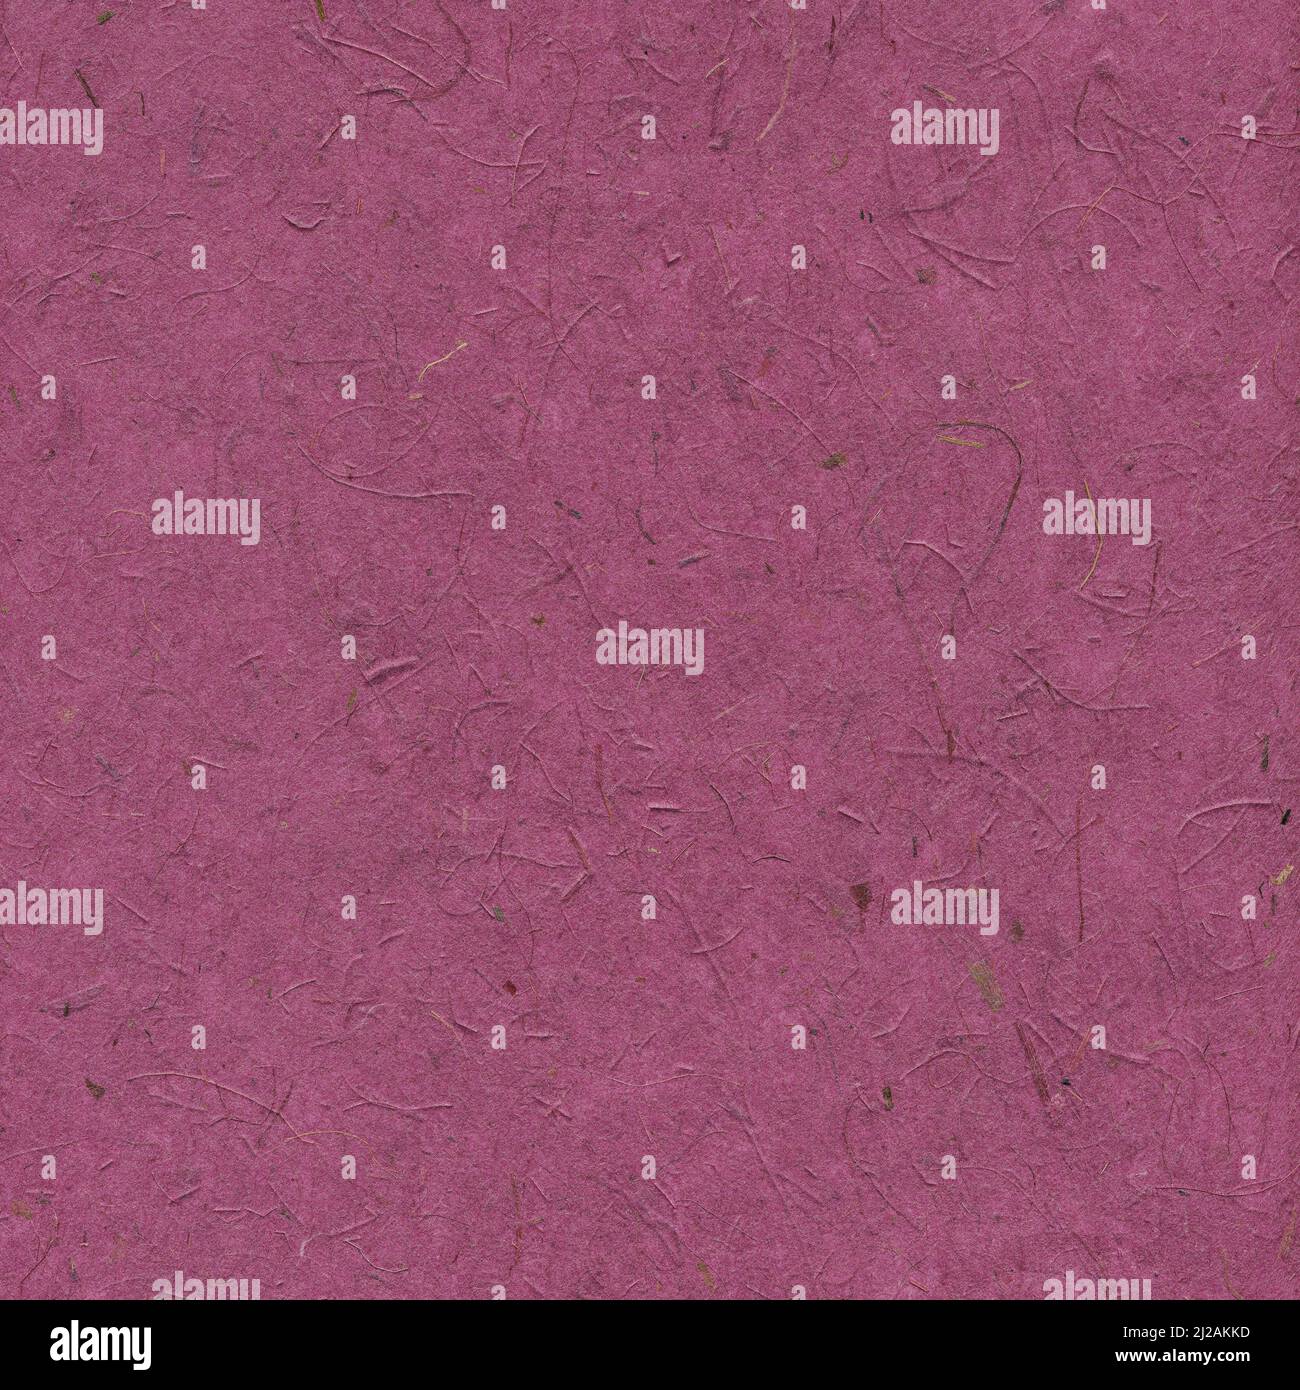 Magenta paper background with pattern Stock Photo